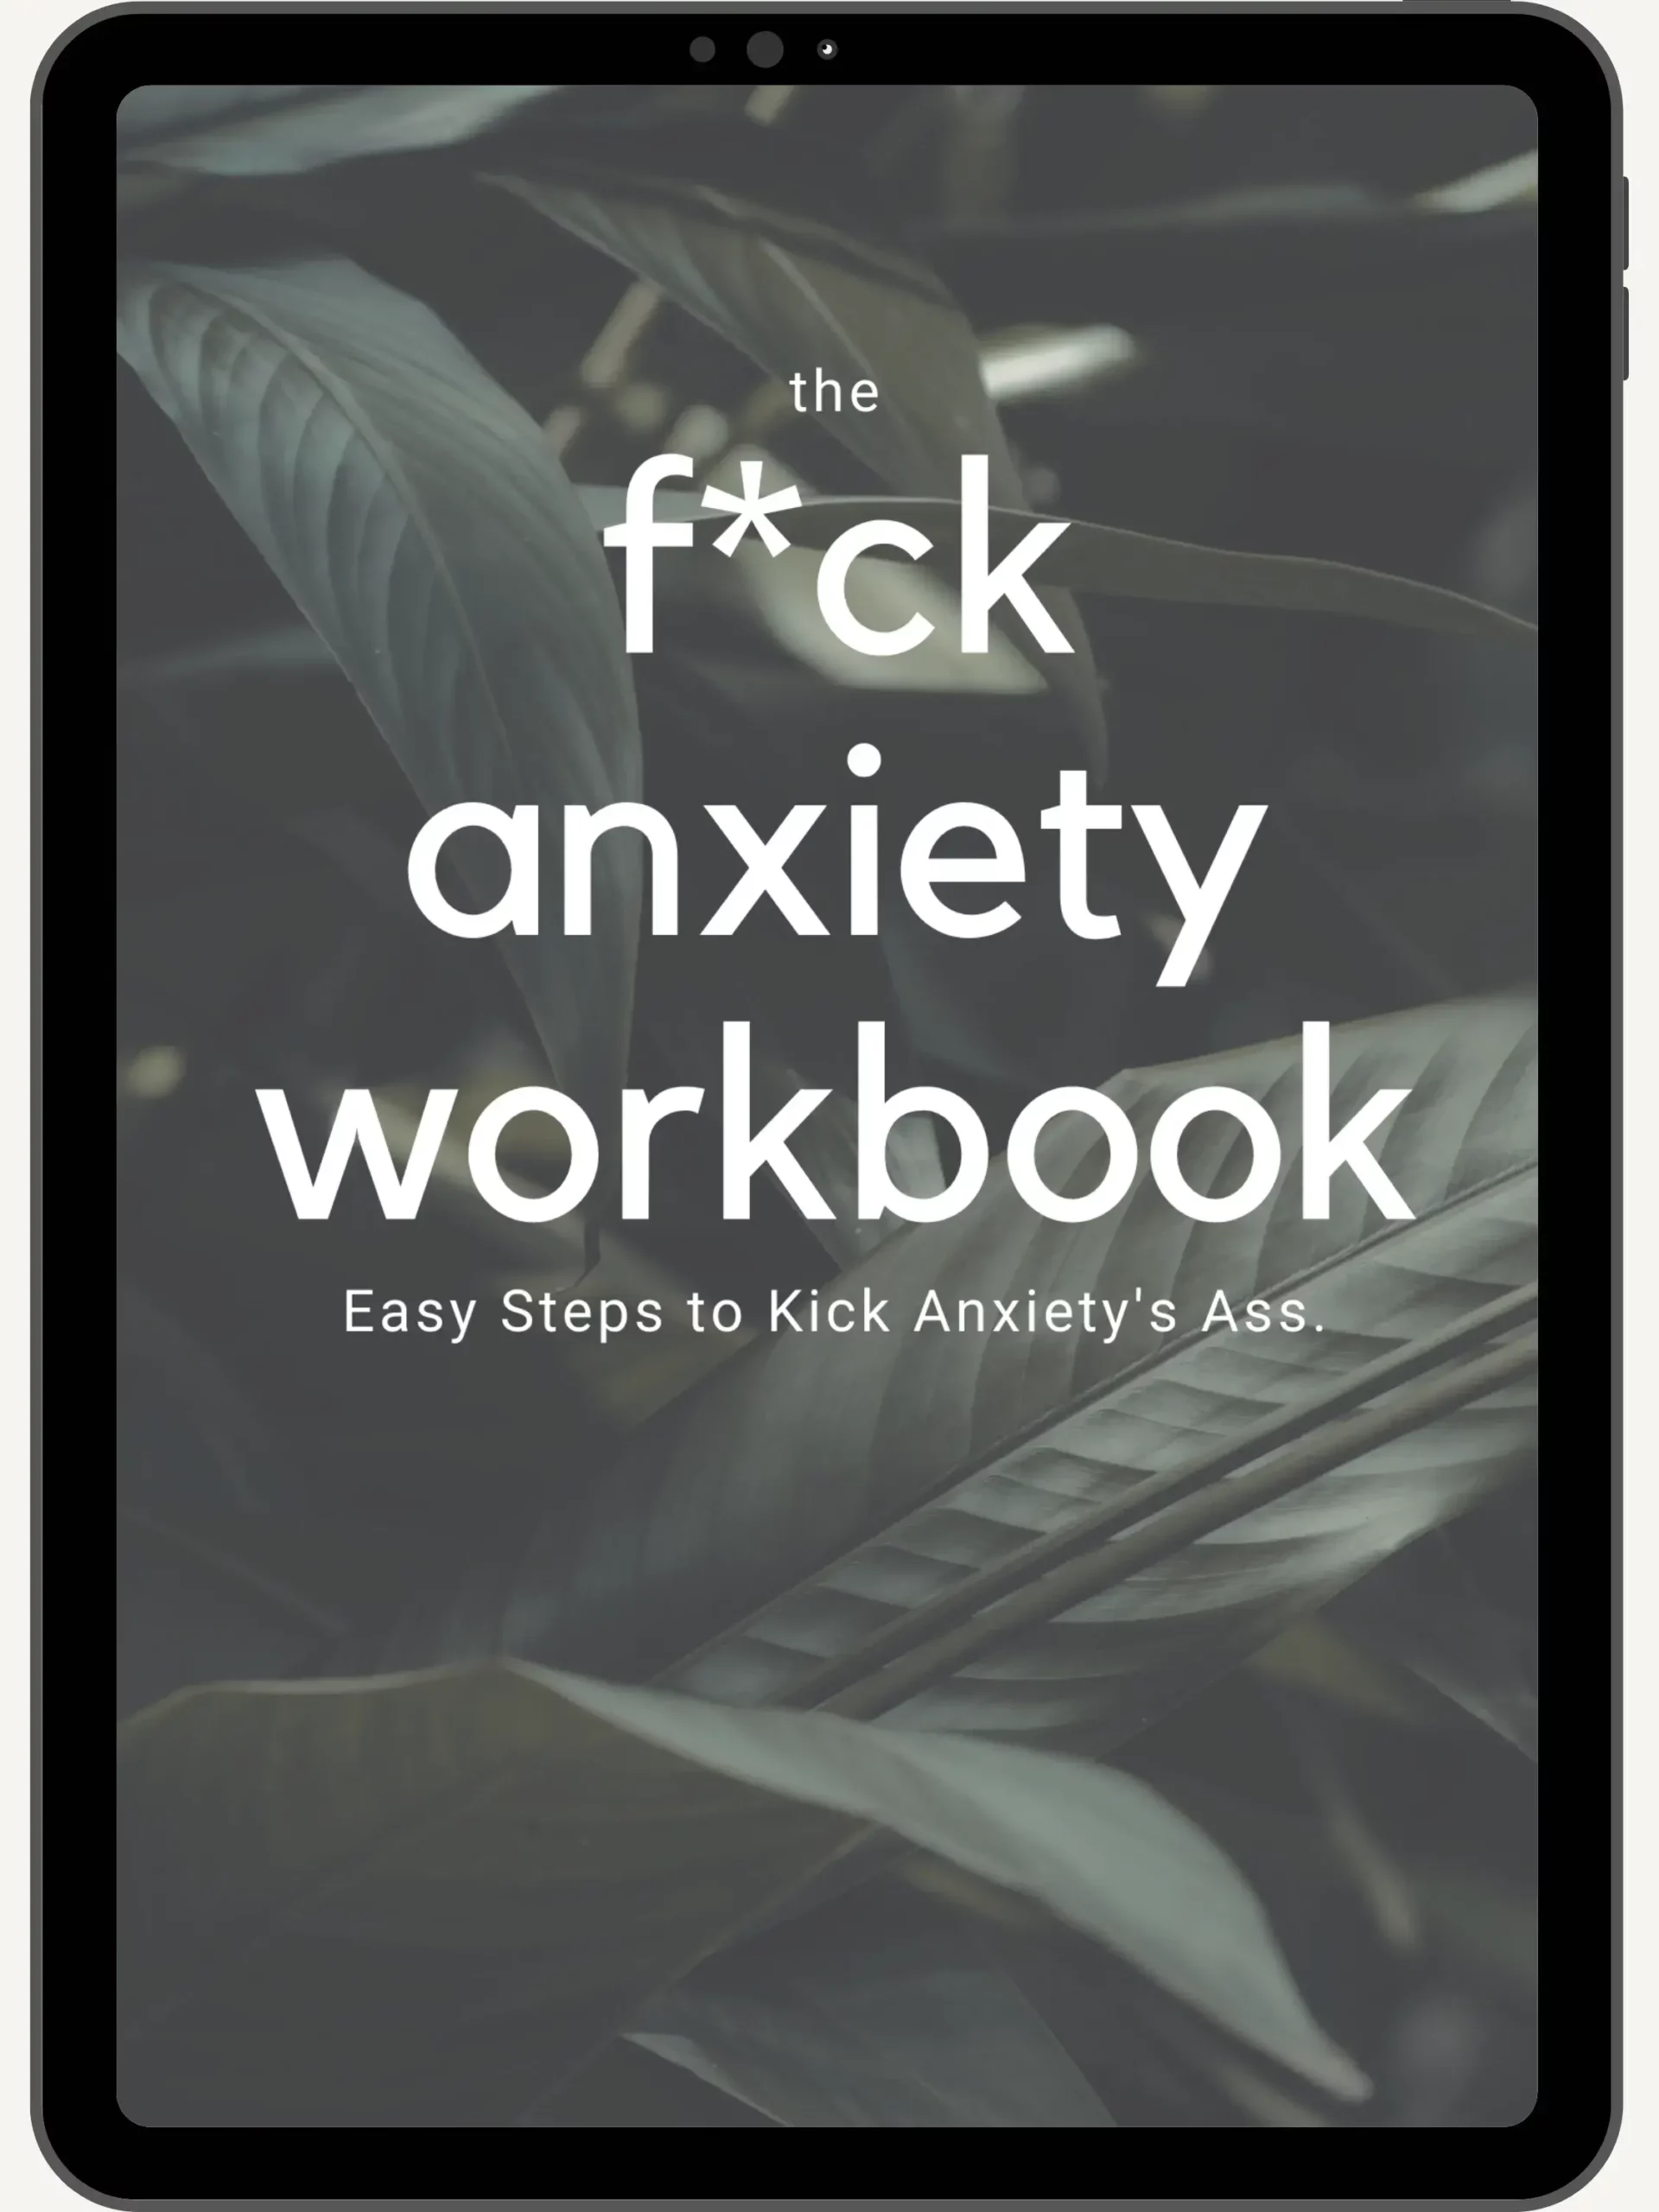 Anxiety Workbook to overcome anxiety and panic attacks